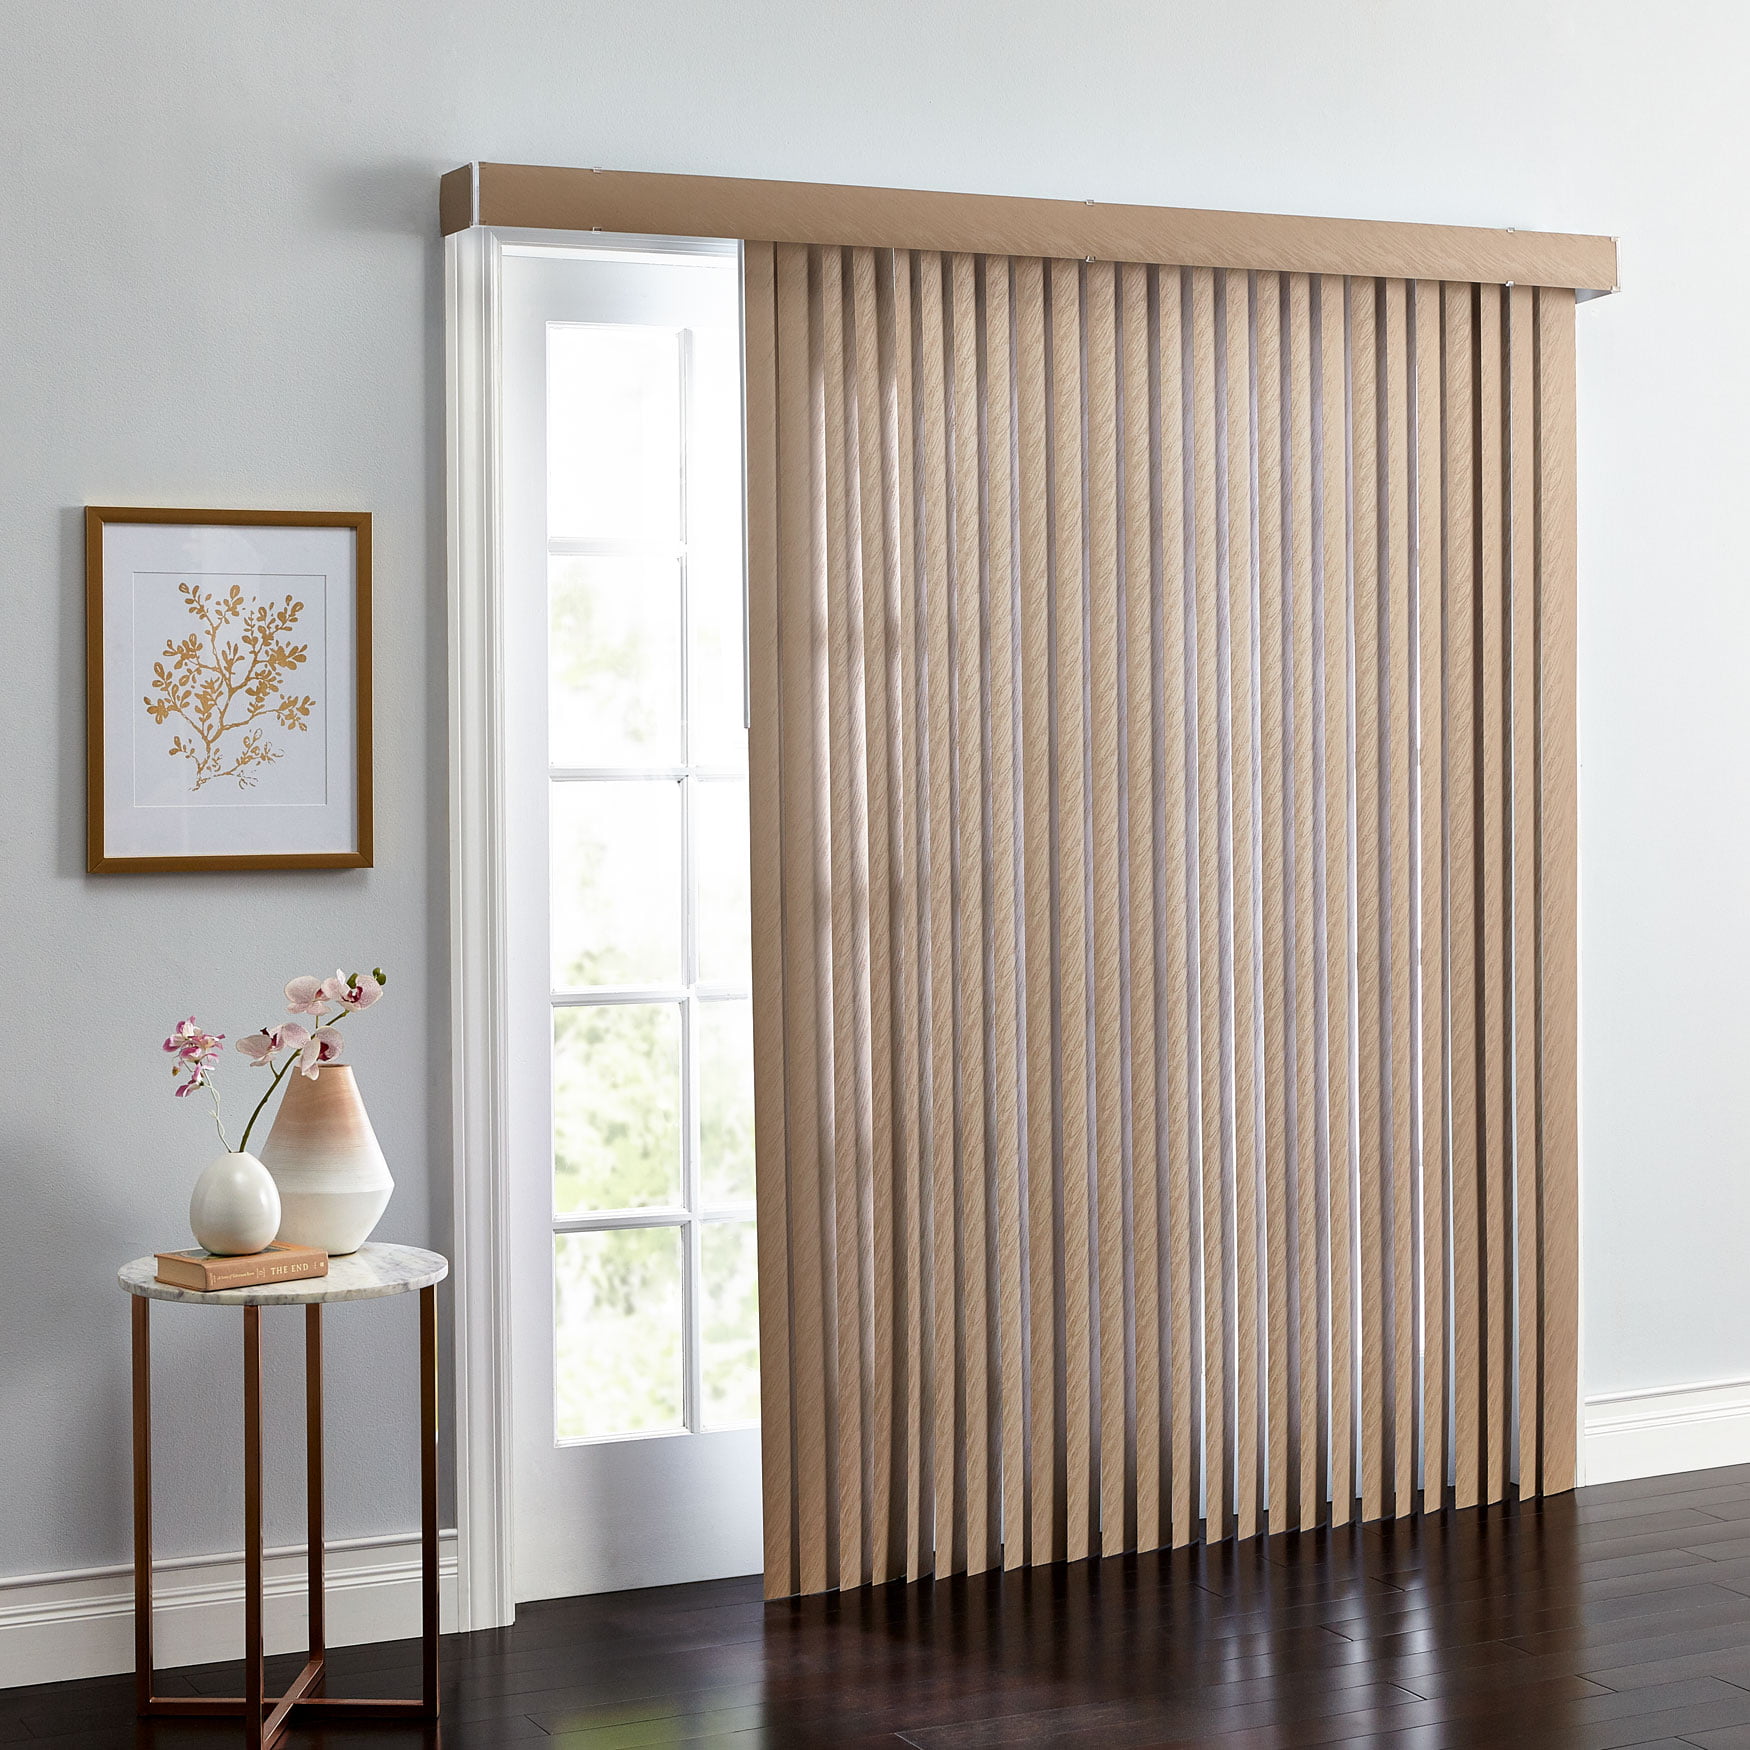 BrylaneHome Embossed Vertical Blinds 3.5 Inch Slats Window Privacy